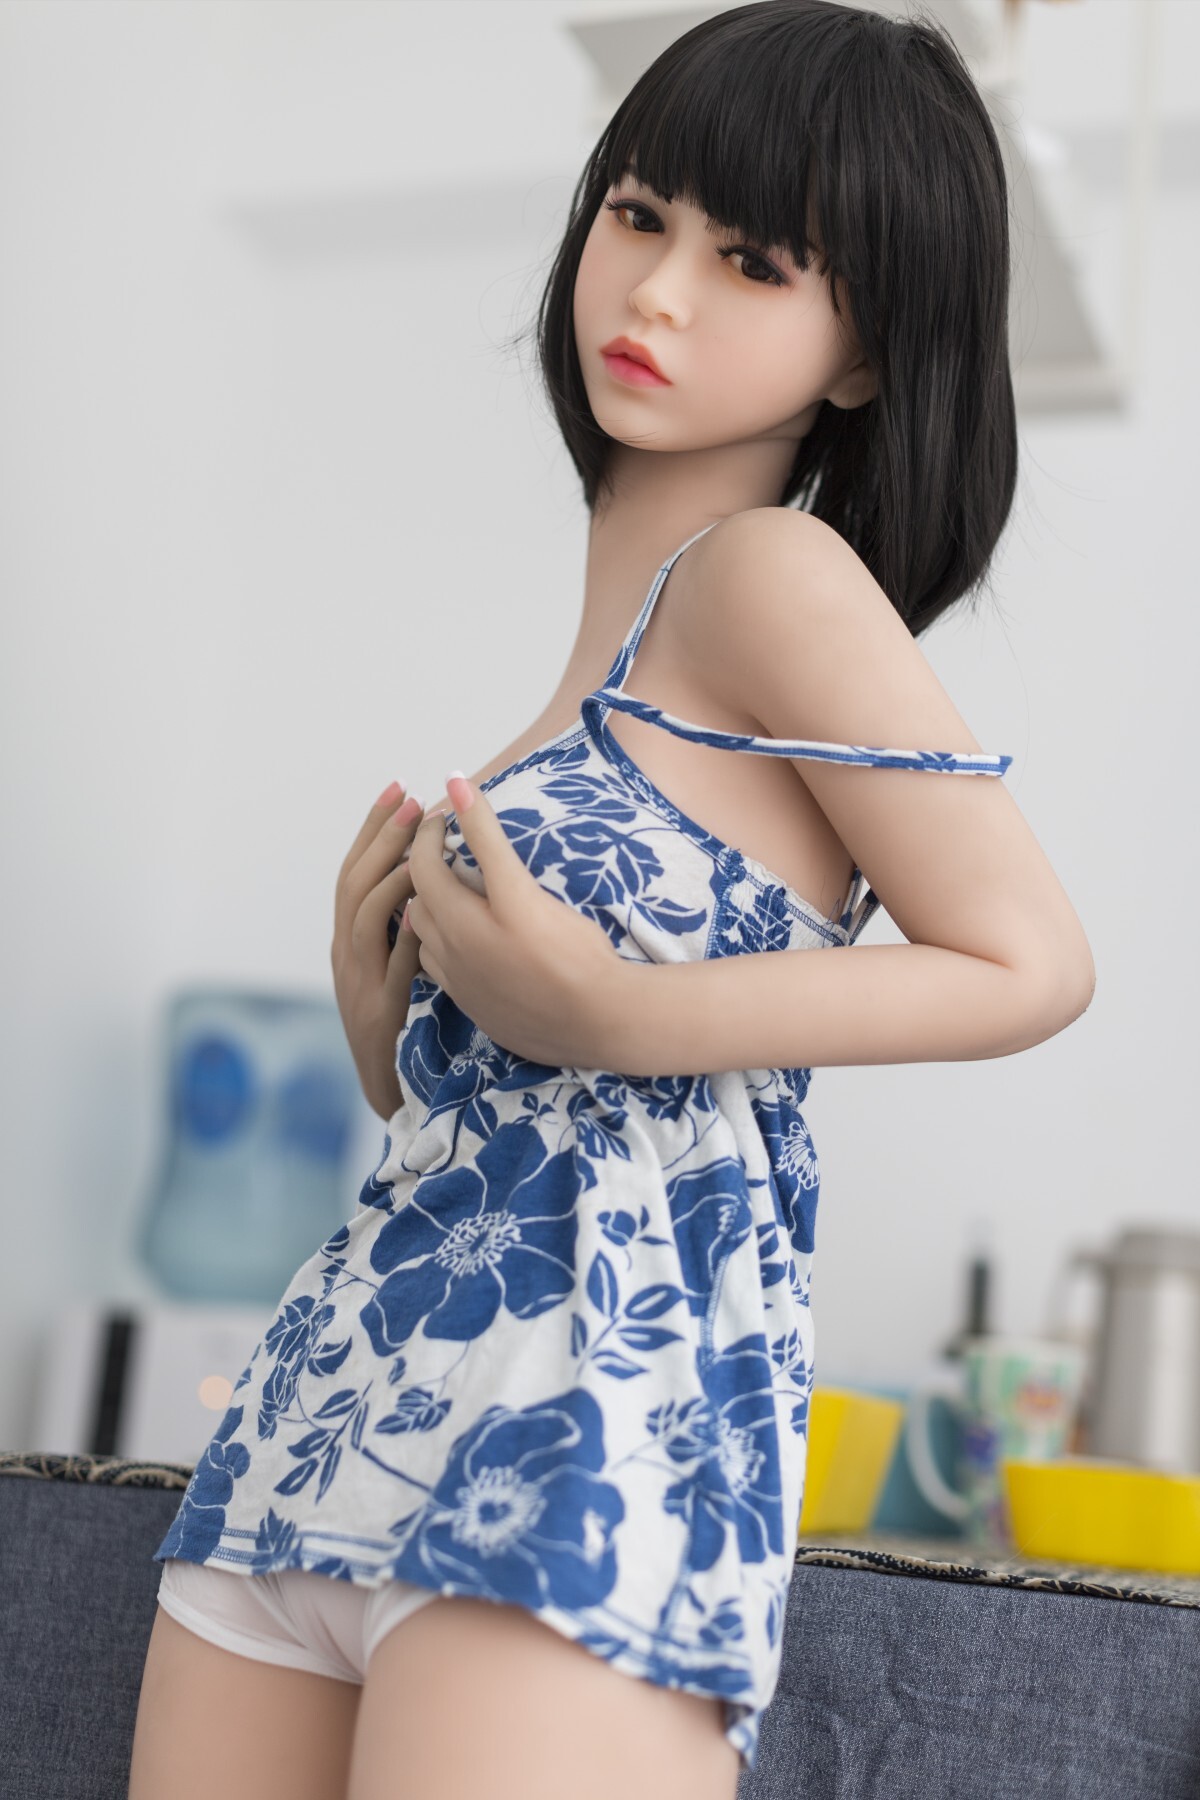 Asian Teen With C Cup Breasts